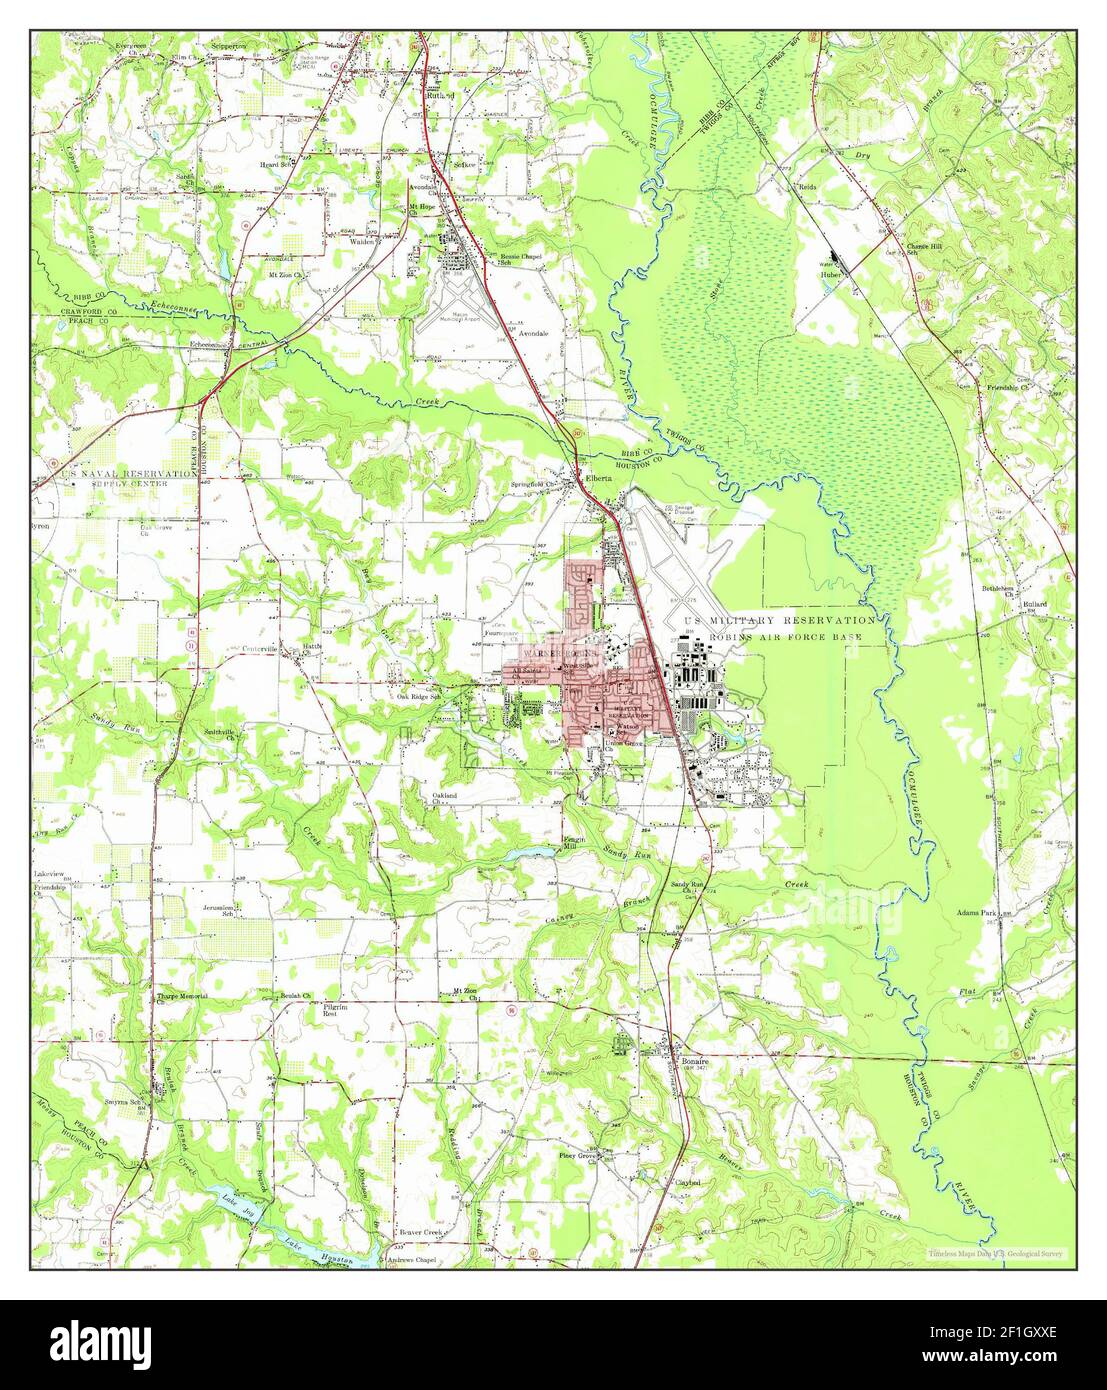 Warner Robins Georgia Map 1956 162500 United States Of America By Timeless Maps Data Us 6383